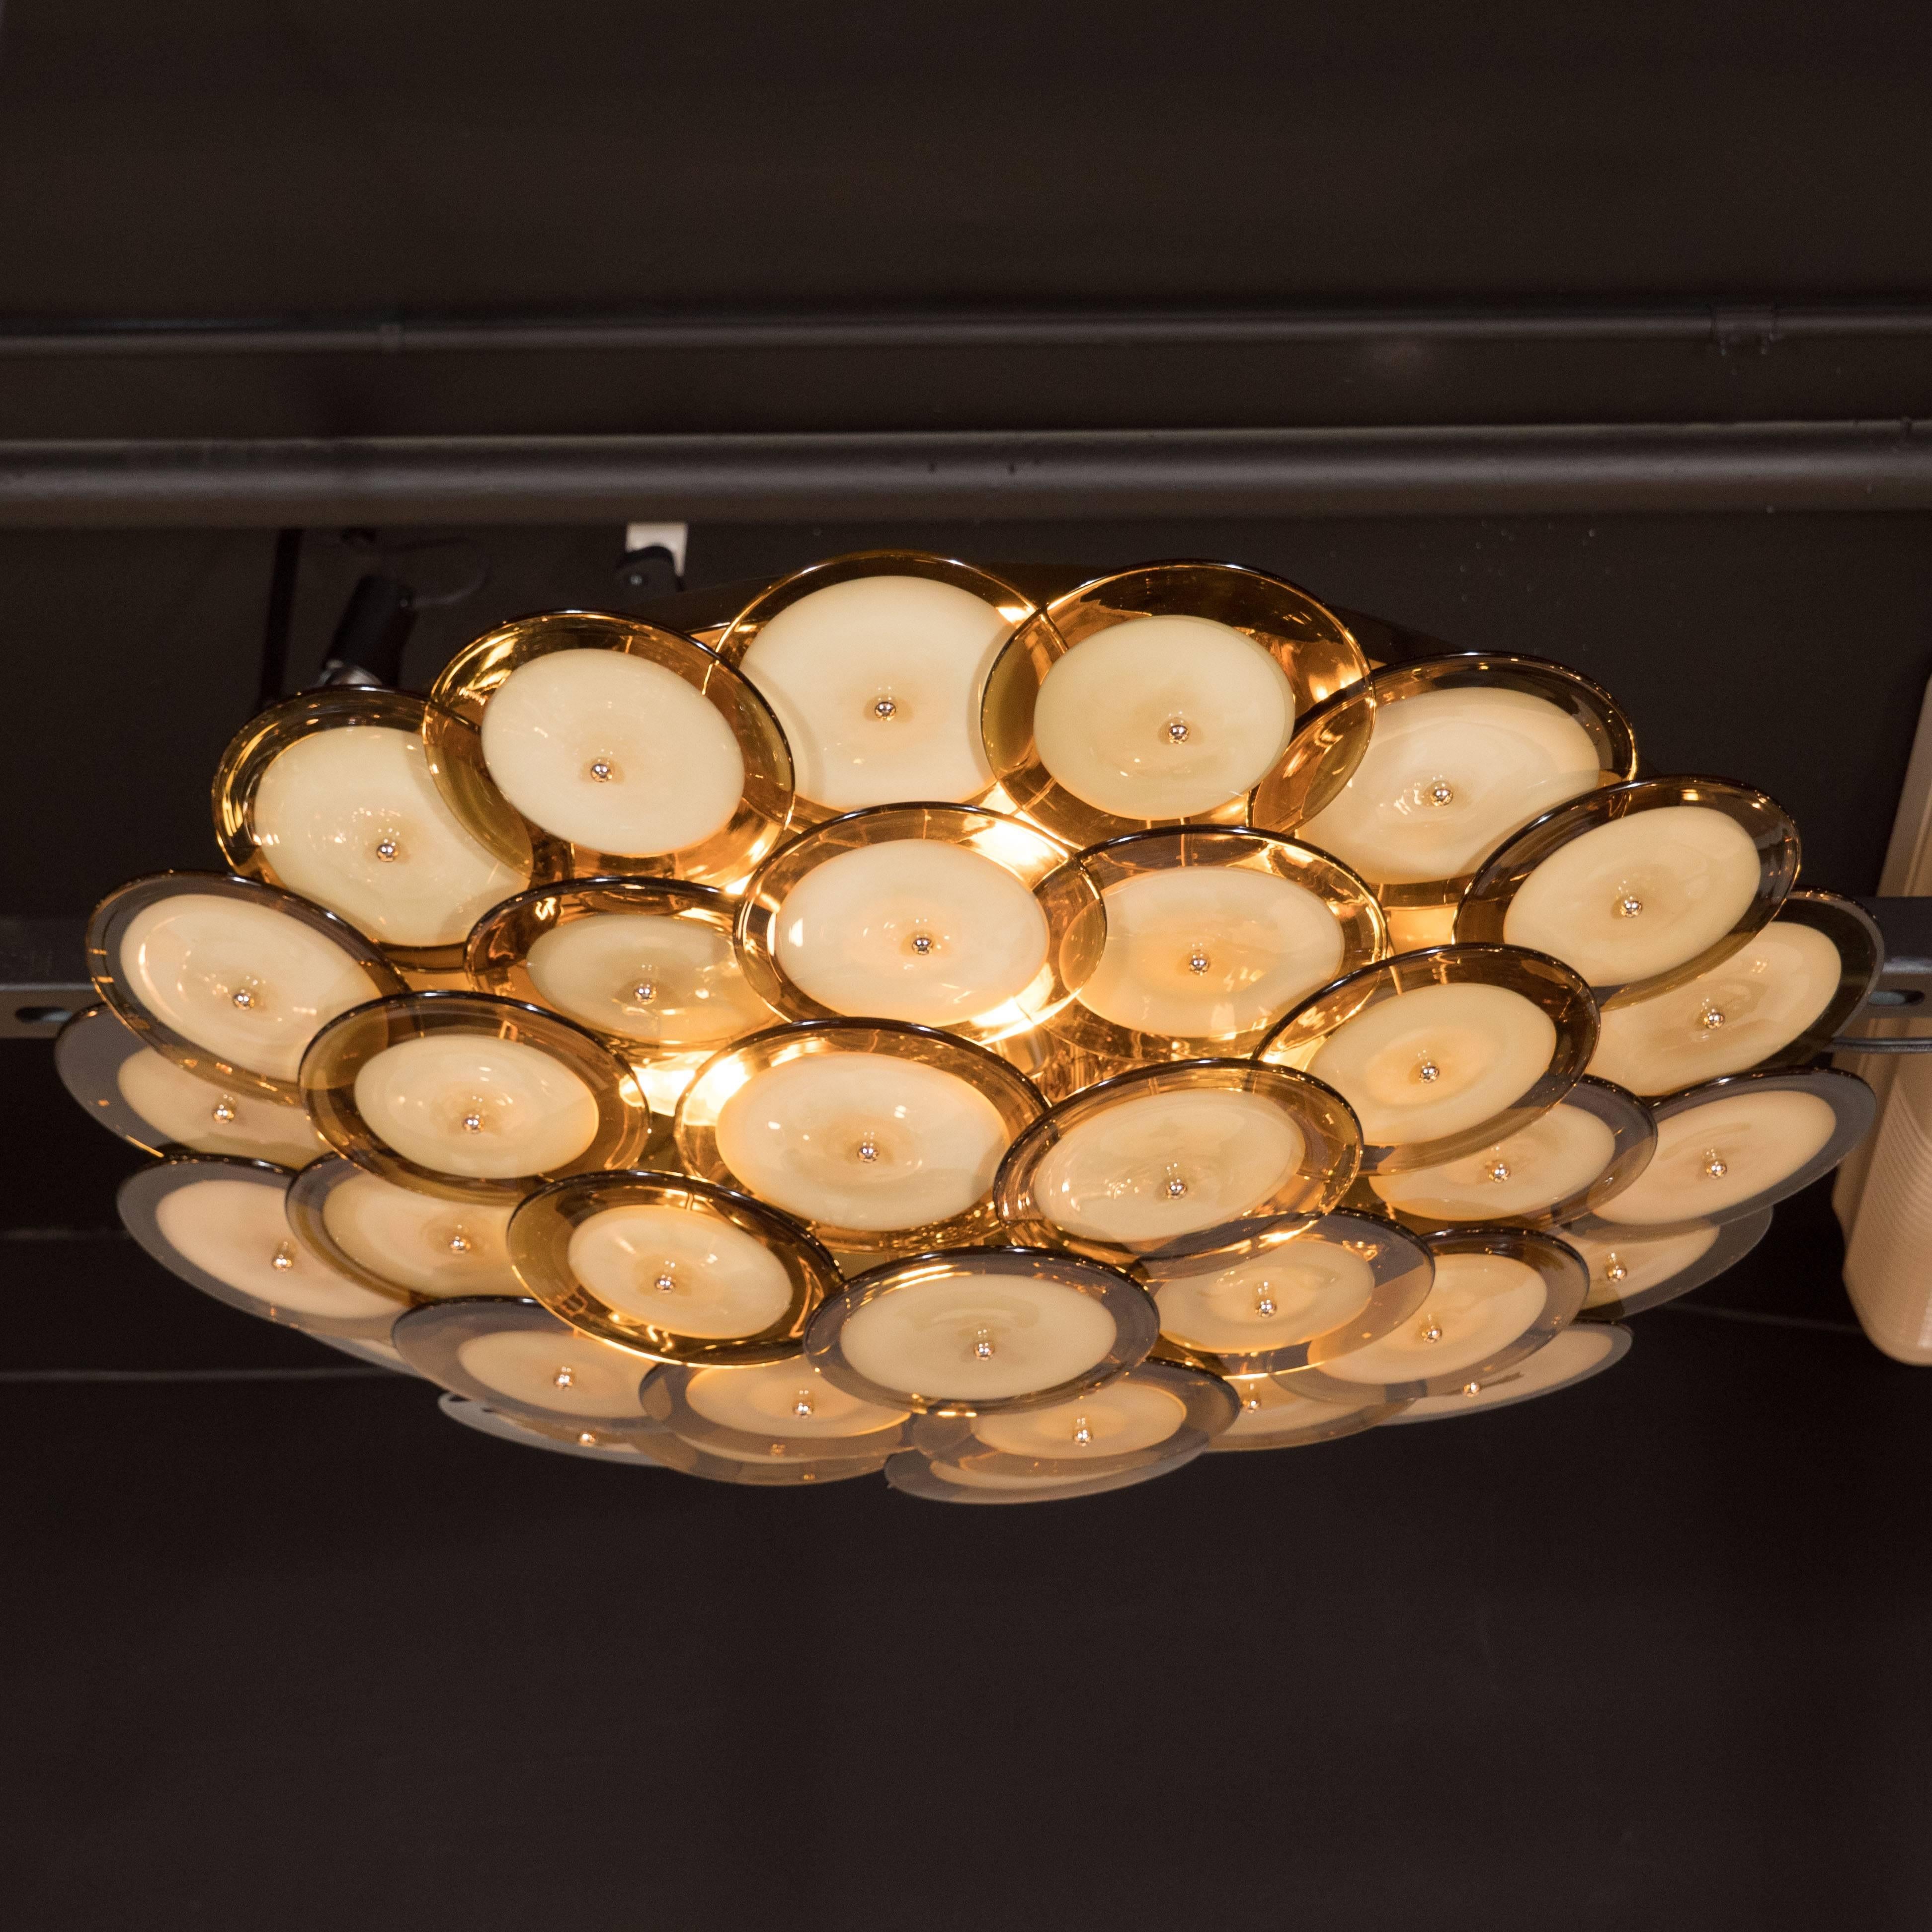 This handblown Murano chandelier is composed of an abundance of overlapping disks with smoked topaz perimeters and opaque oyster shell centres attached to a polished brass base. The disks are connected to the base by brass rods, whose ends gently